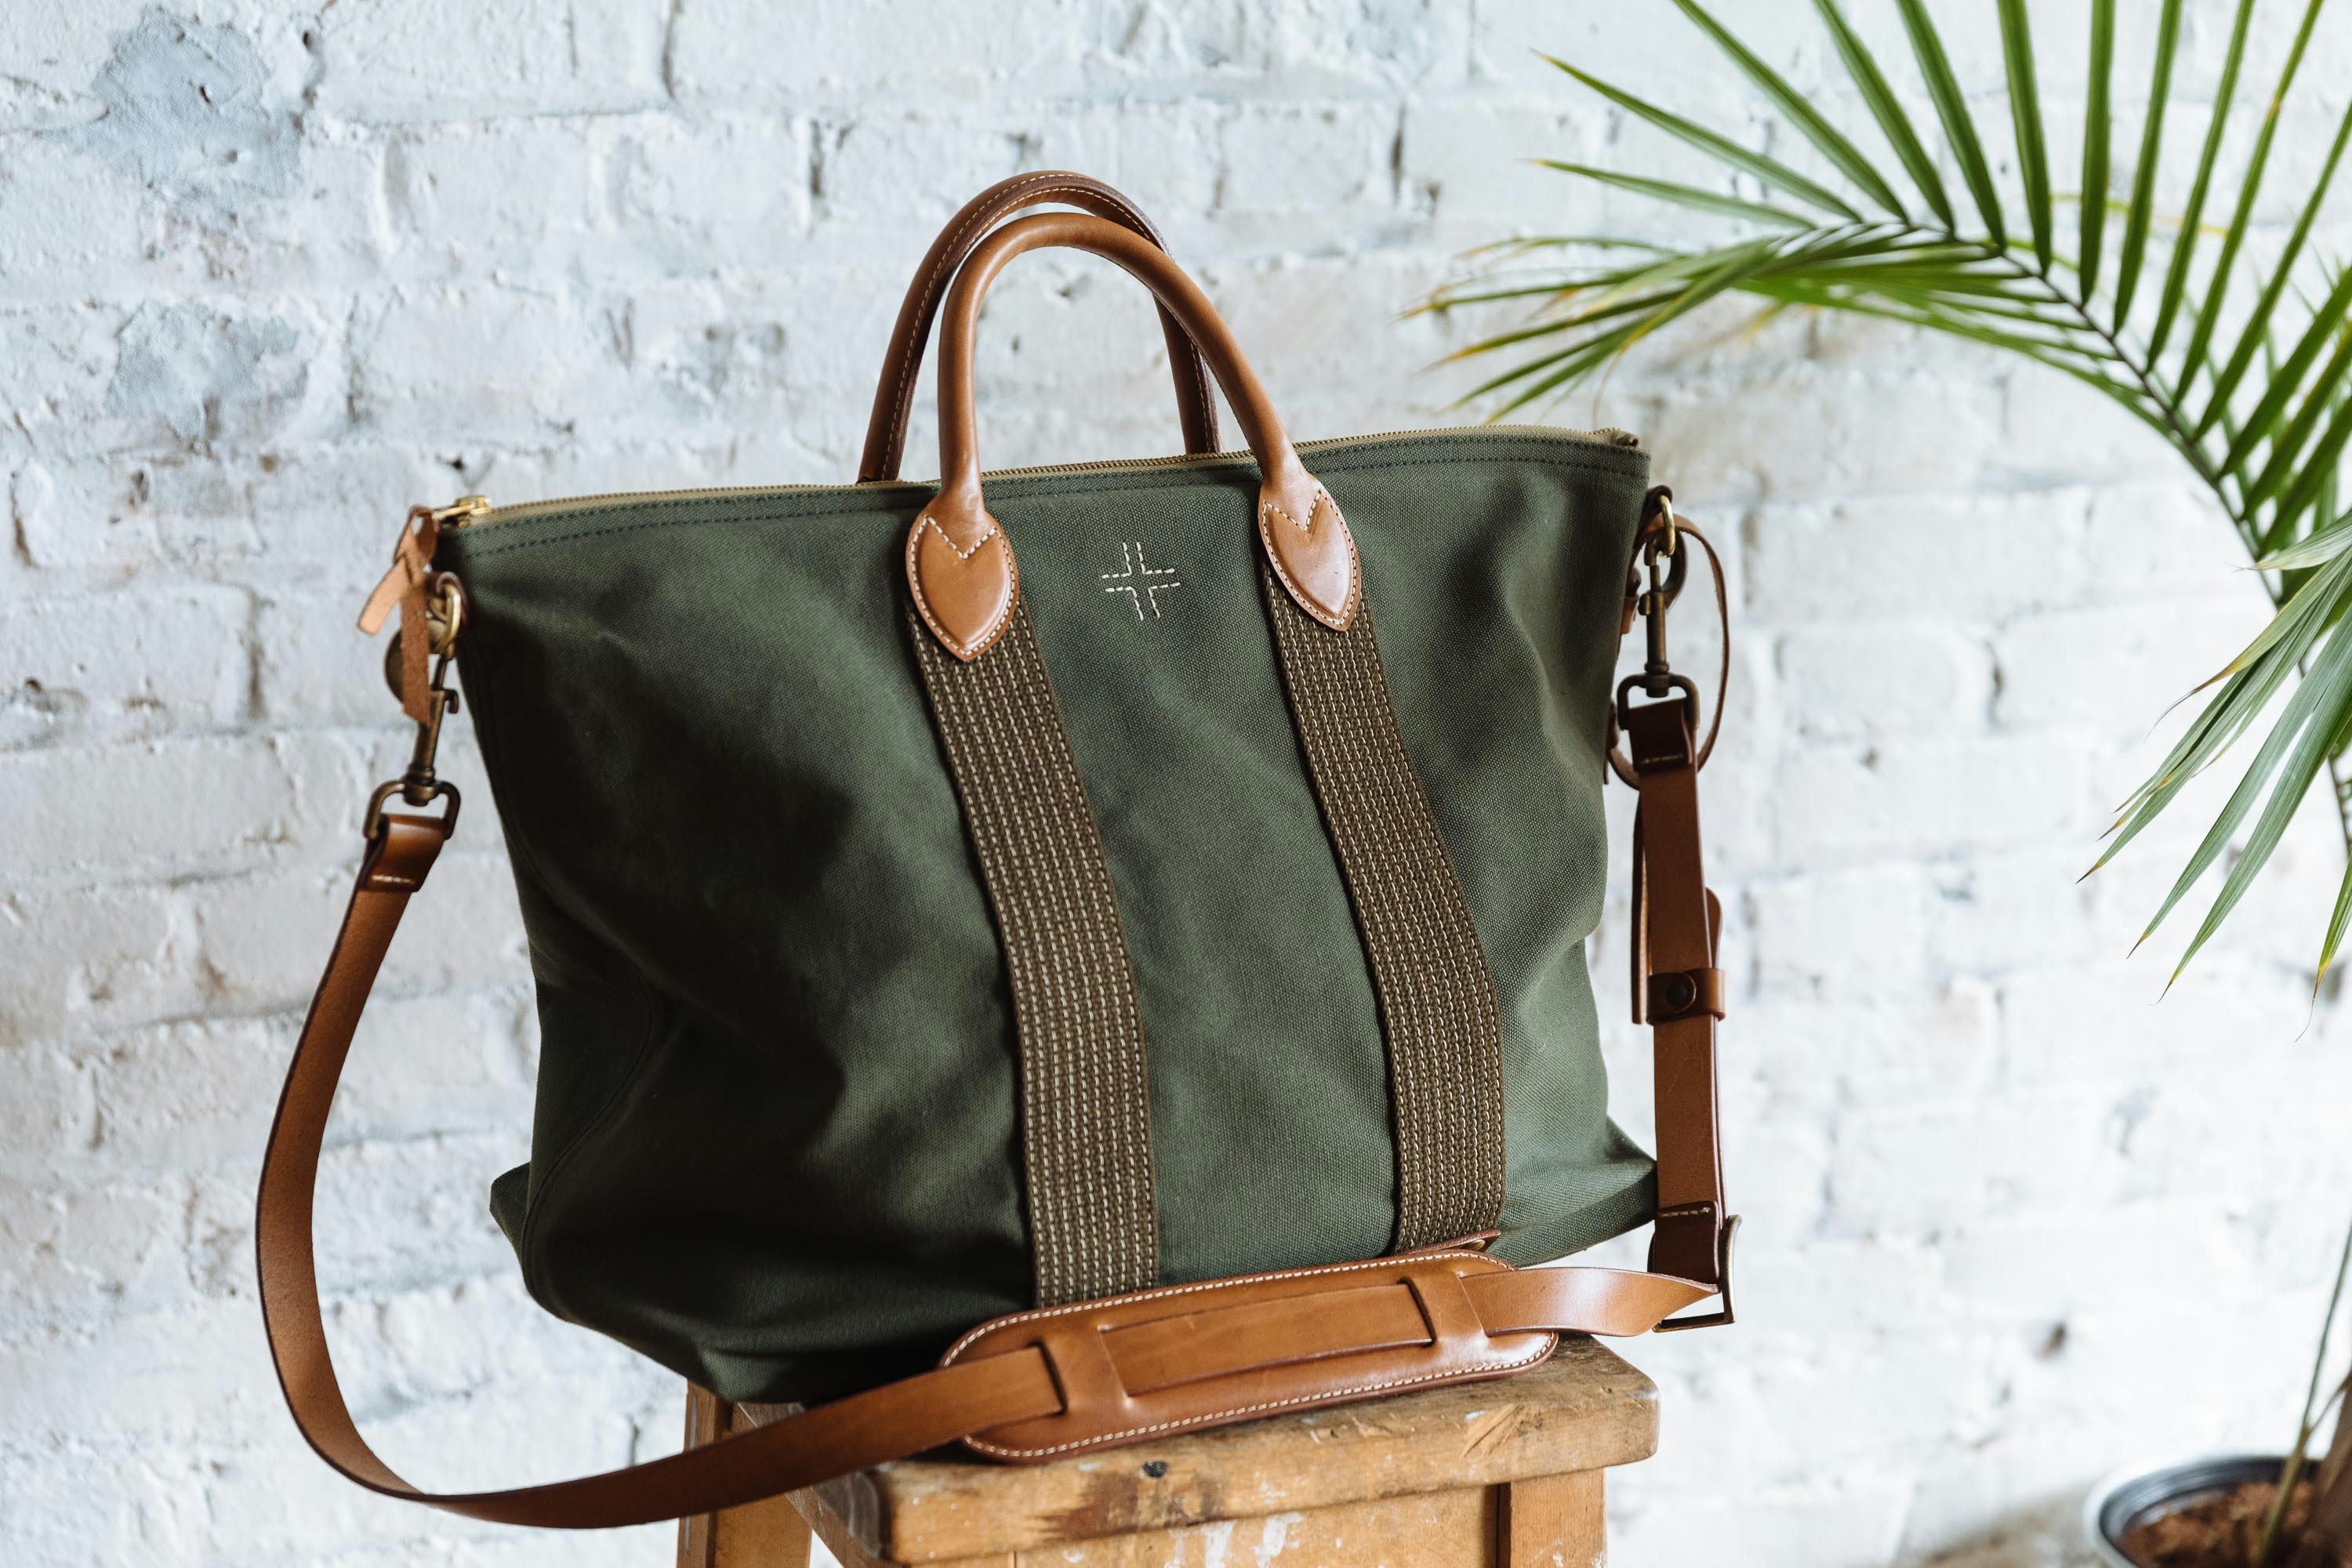 WP Standard's green canvas travel bag, with brown leather handles, a leather shoulder strap, and brown stripes on the front, sitting on a stool in front of a white brick wall and next to a palm frond